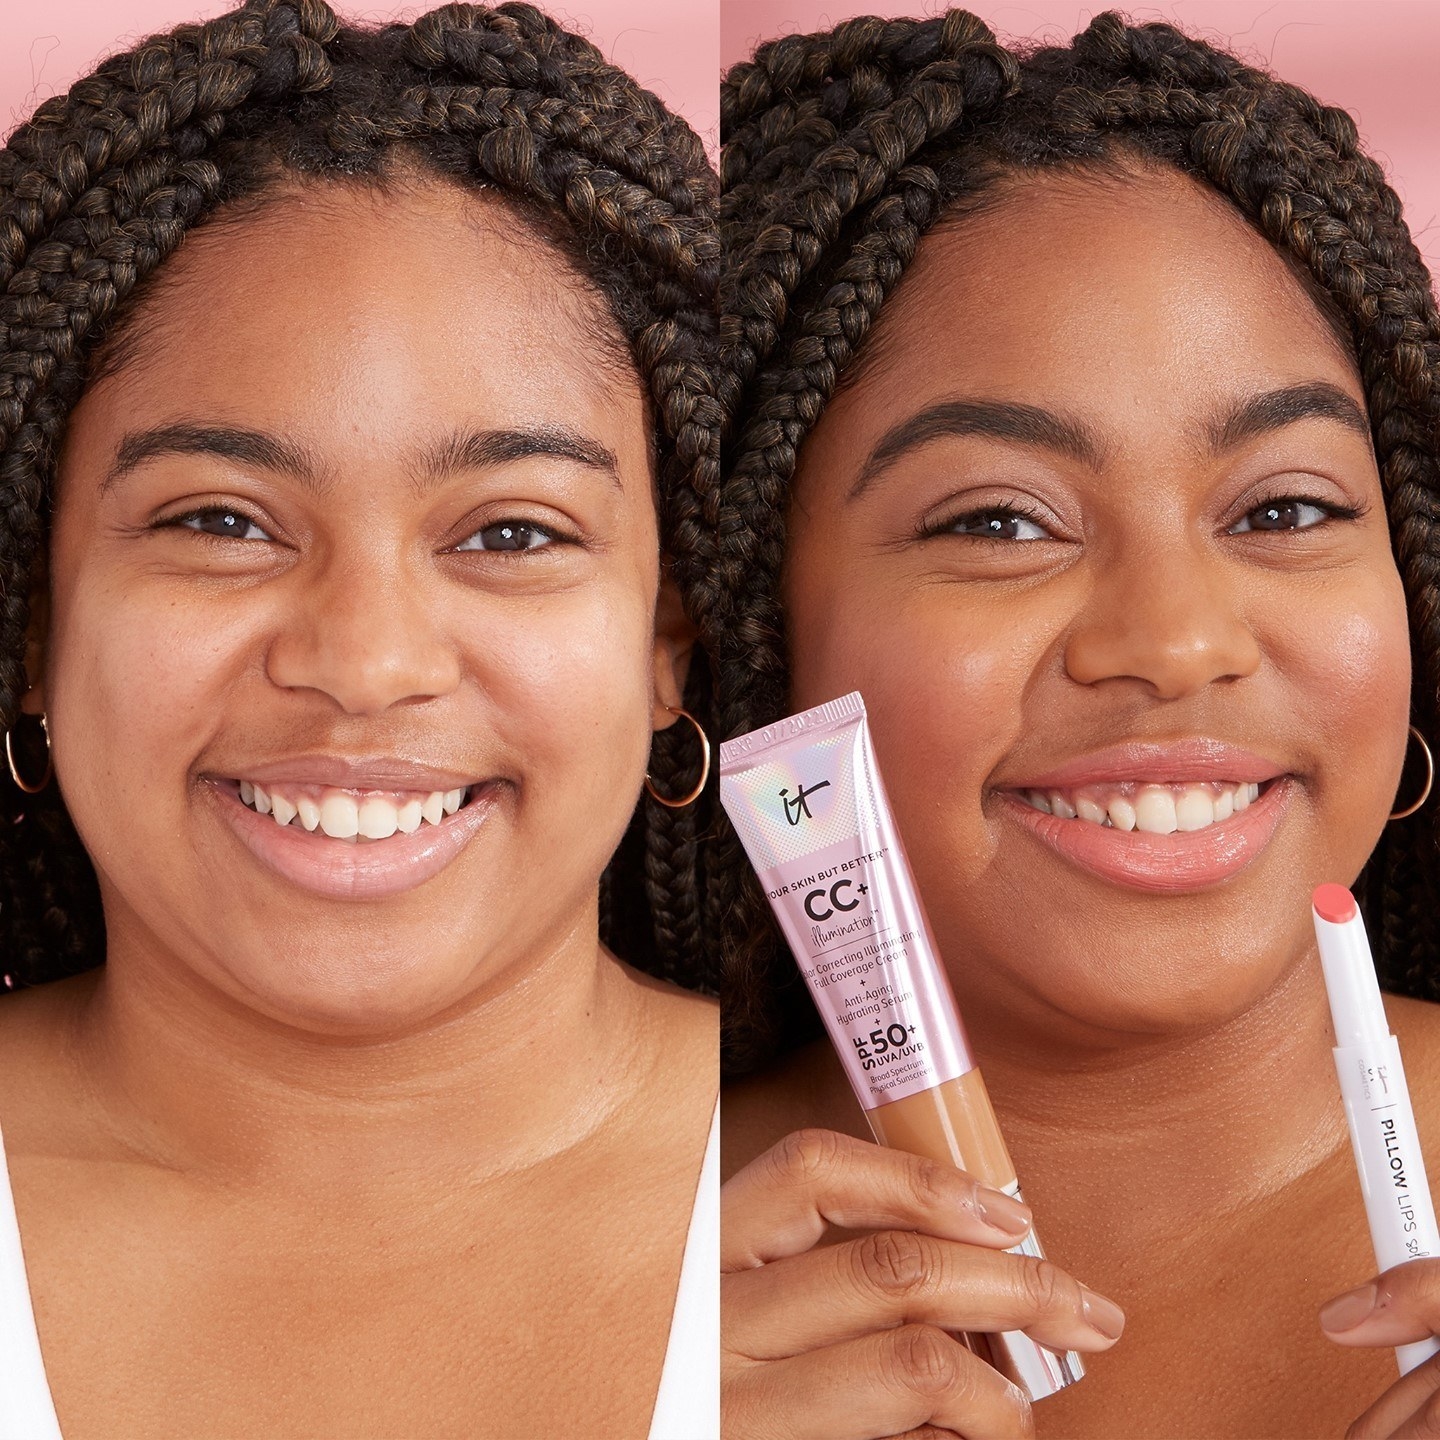 model before and after wearing the cc+ cream illumination, looking radiant afterward